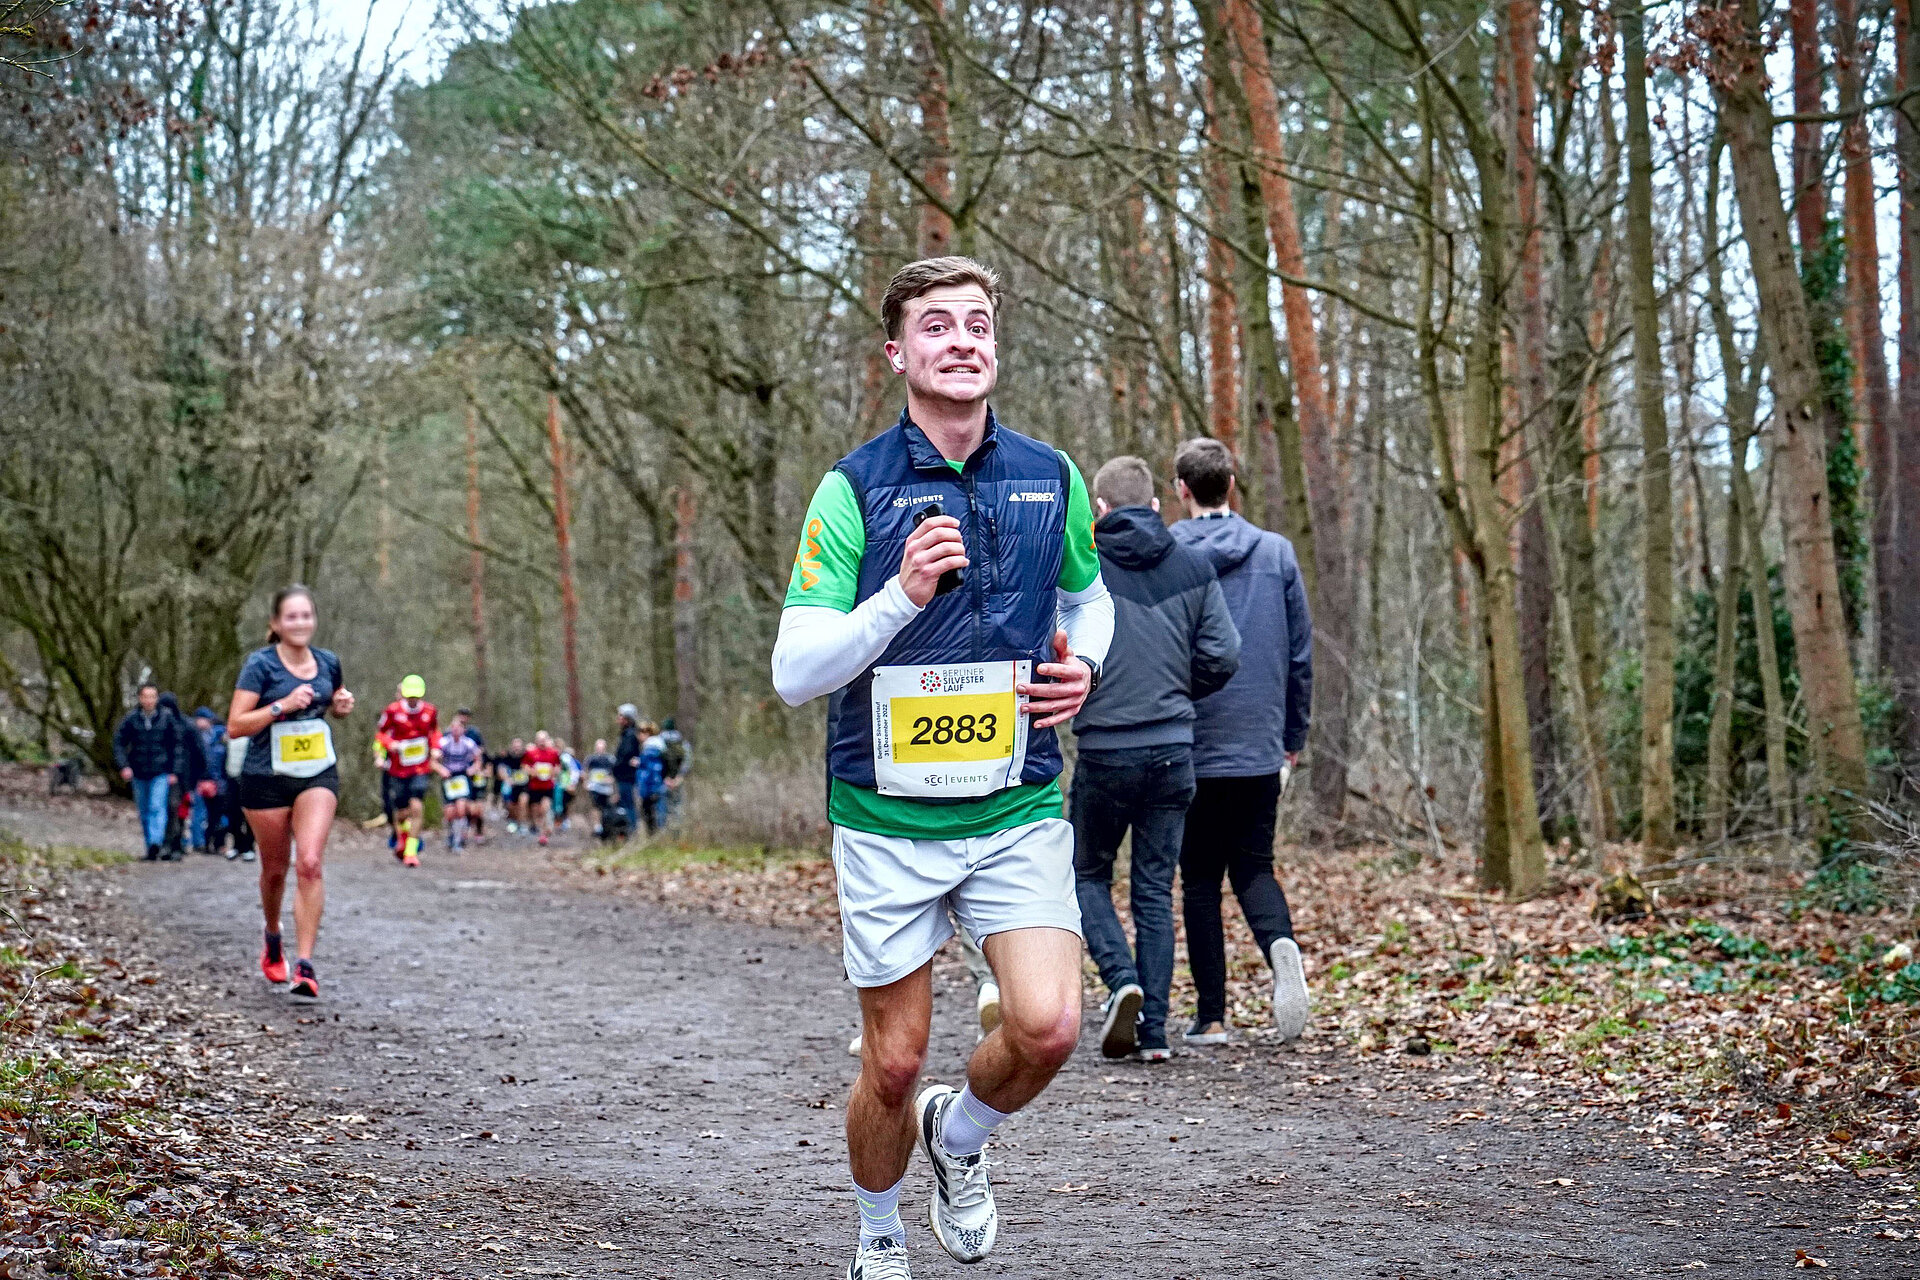 Berlin New Year's Eve Run: Male runner broke away from a group on the course in the forest @ SCC EVENTS / Sportografen